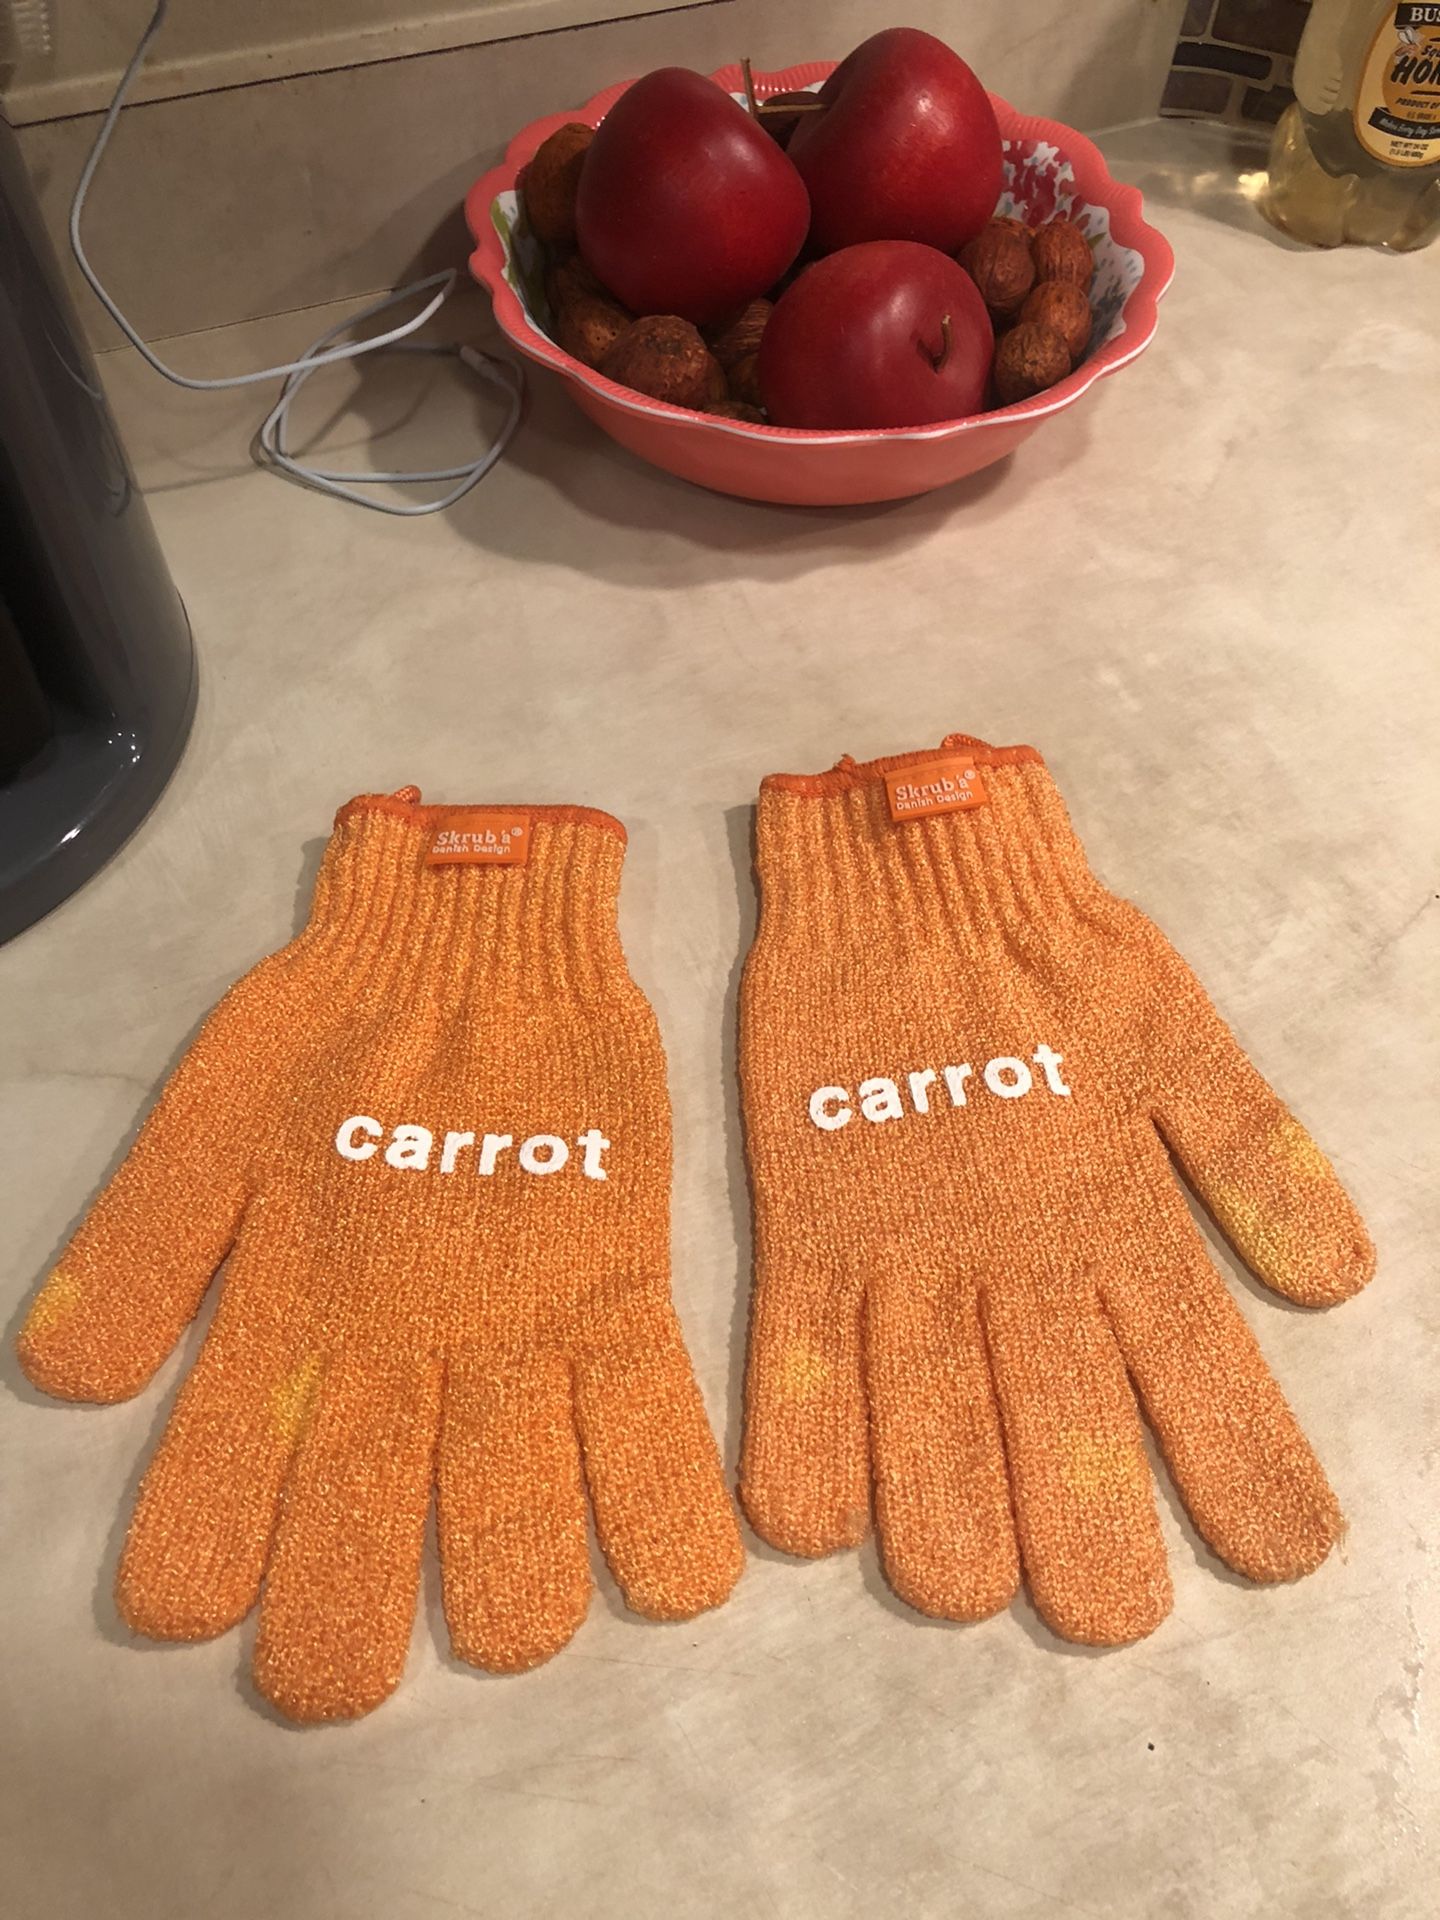 SCRUBBING GLOVES FOR FRUITS AND VEGETABLES ONE SIZE FITS MOST 